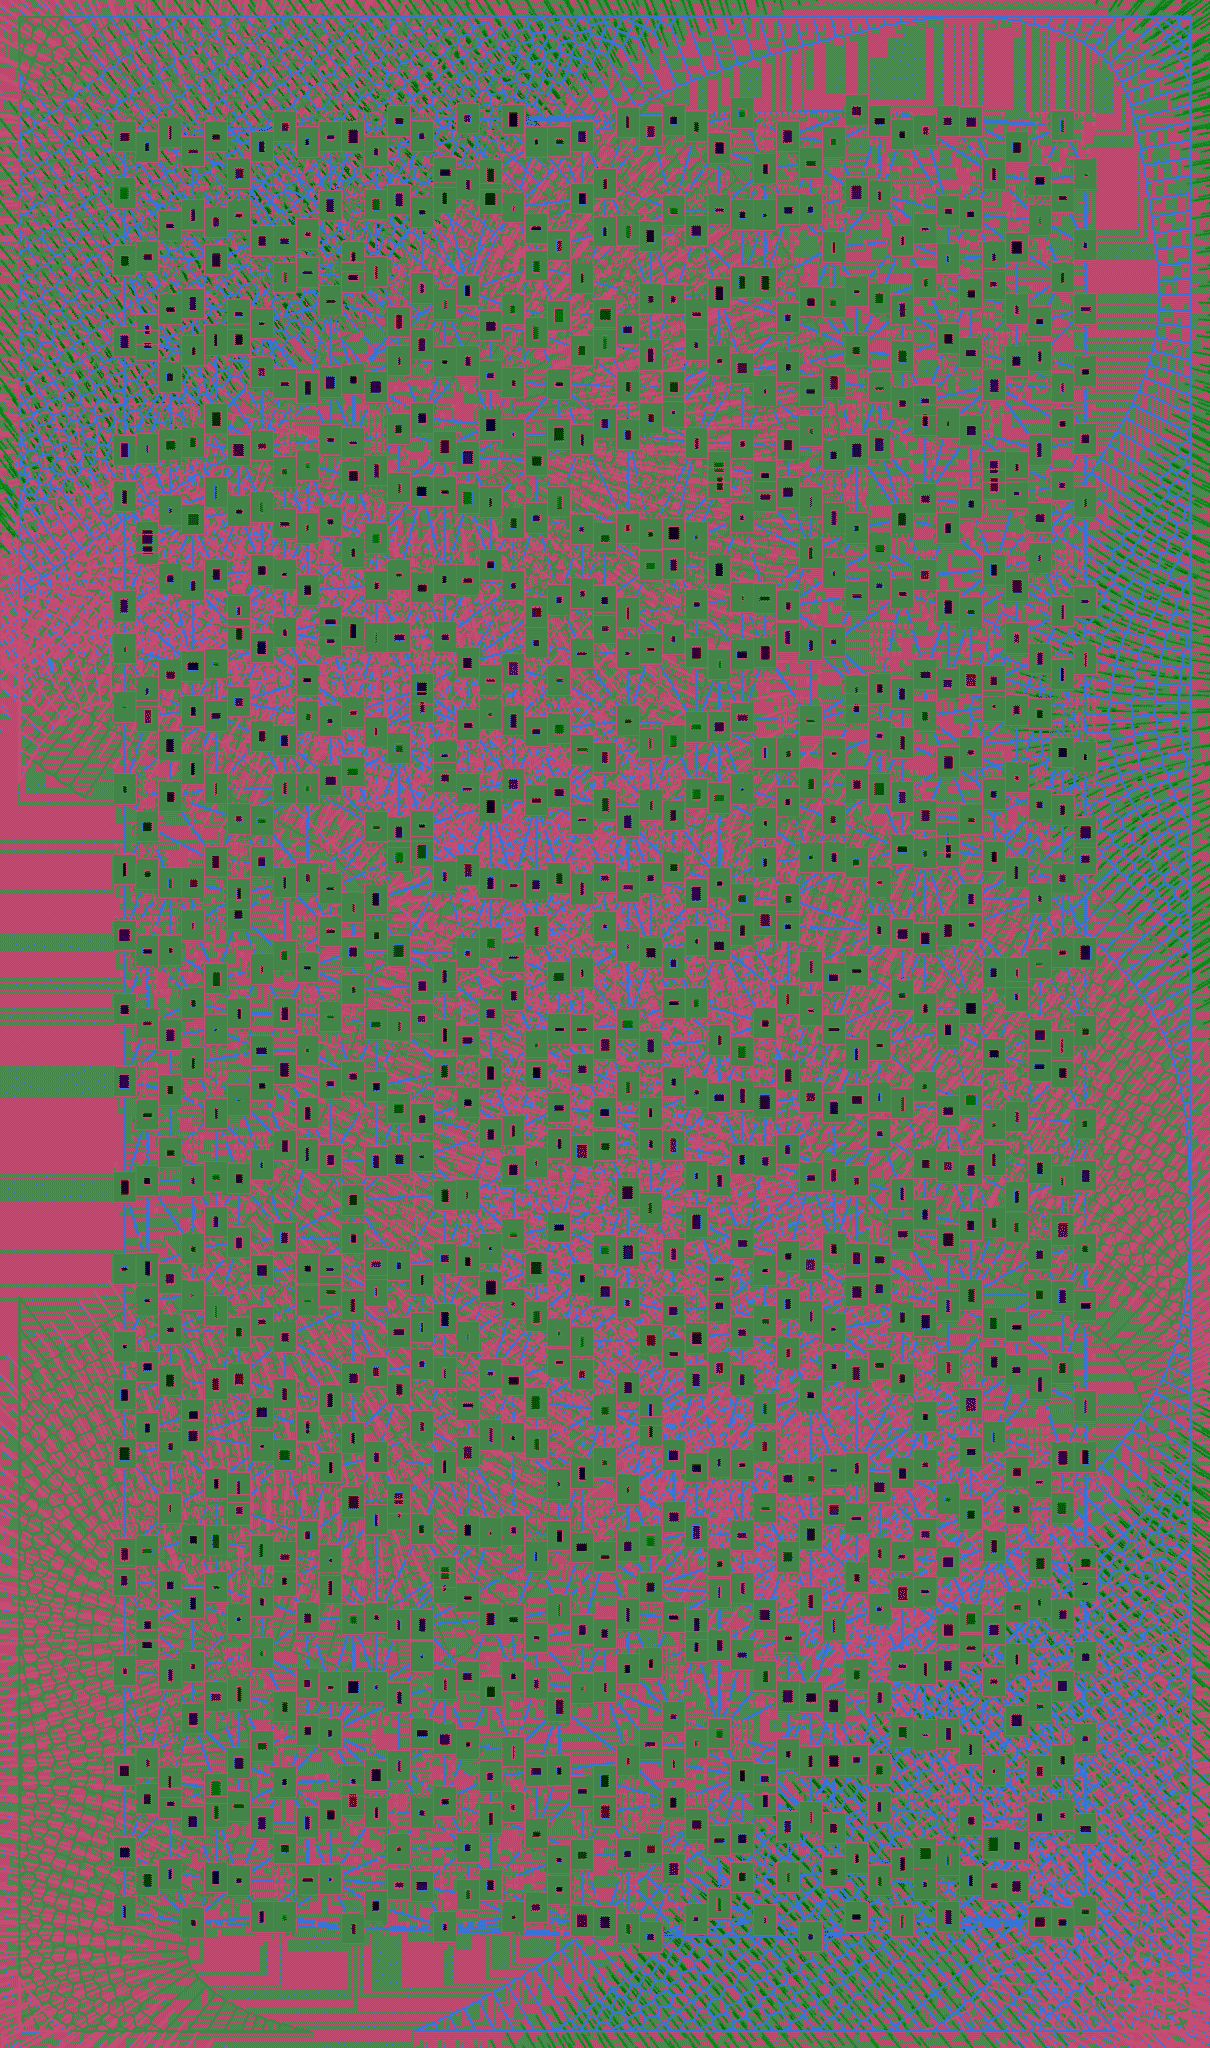 Layered Algorithmic Abstraction #179